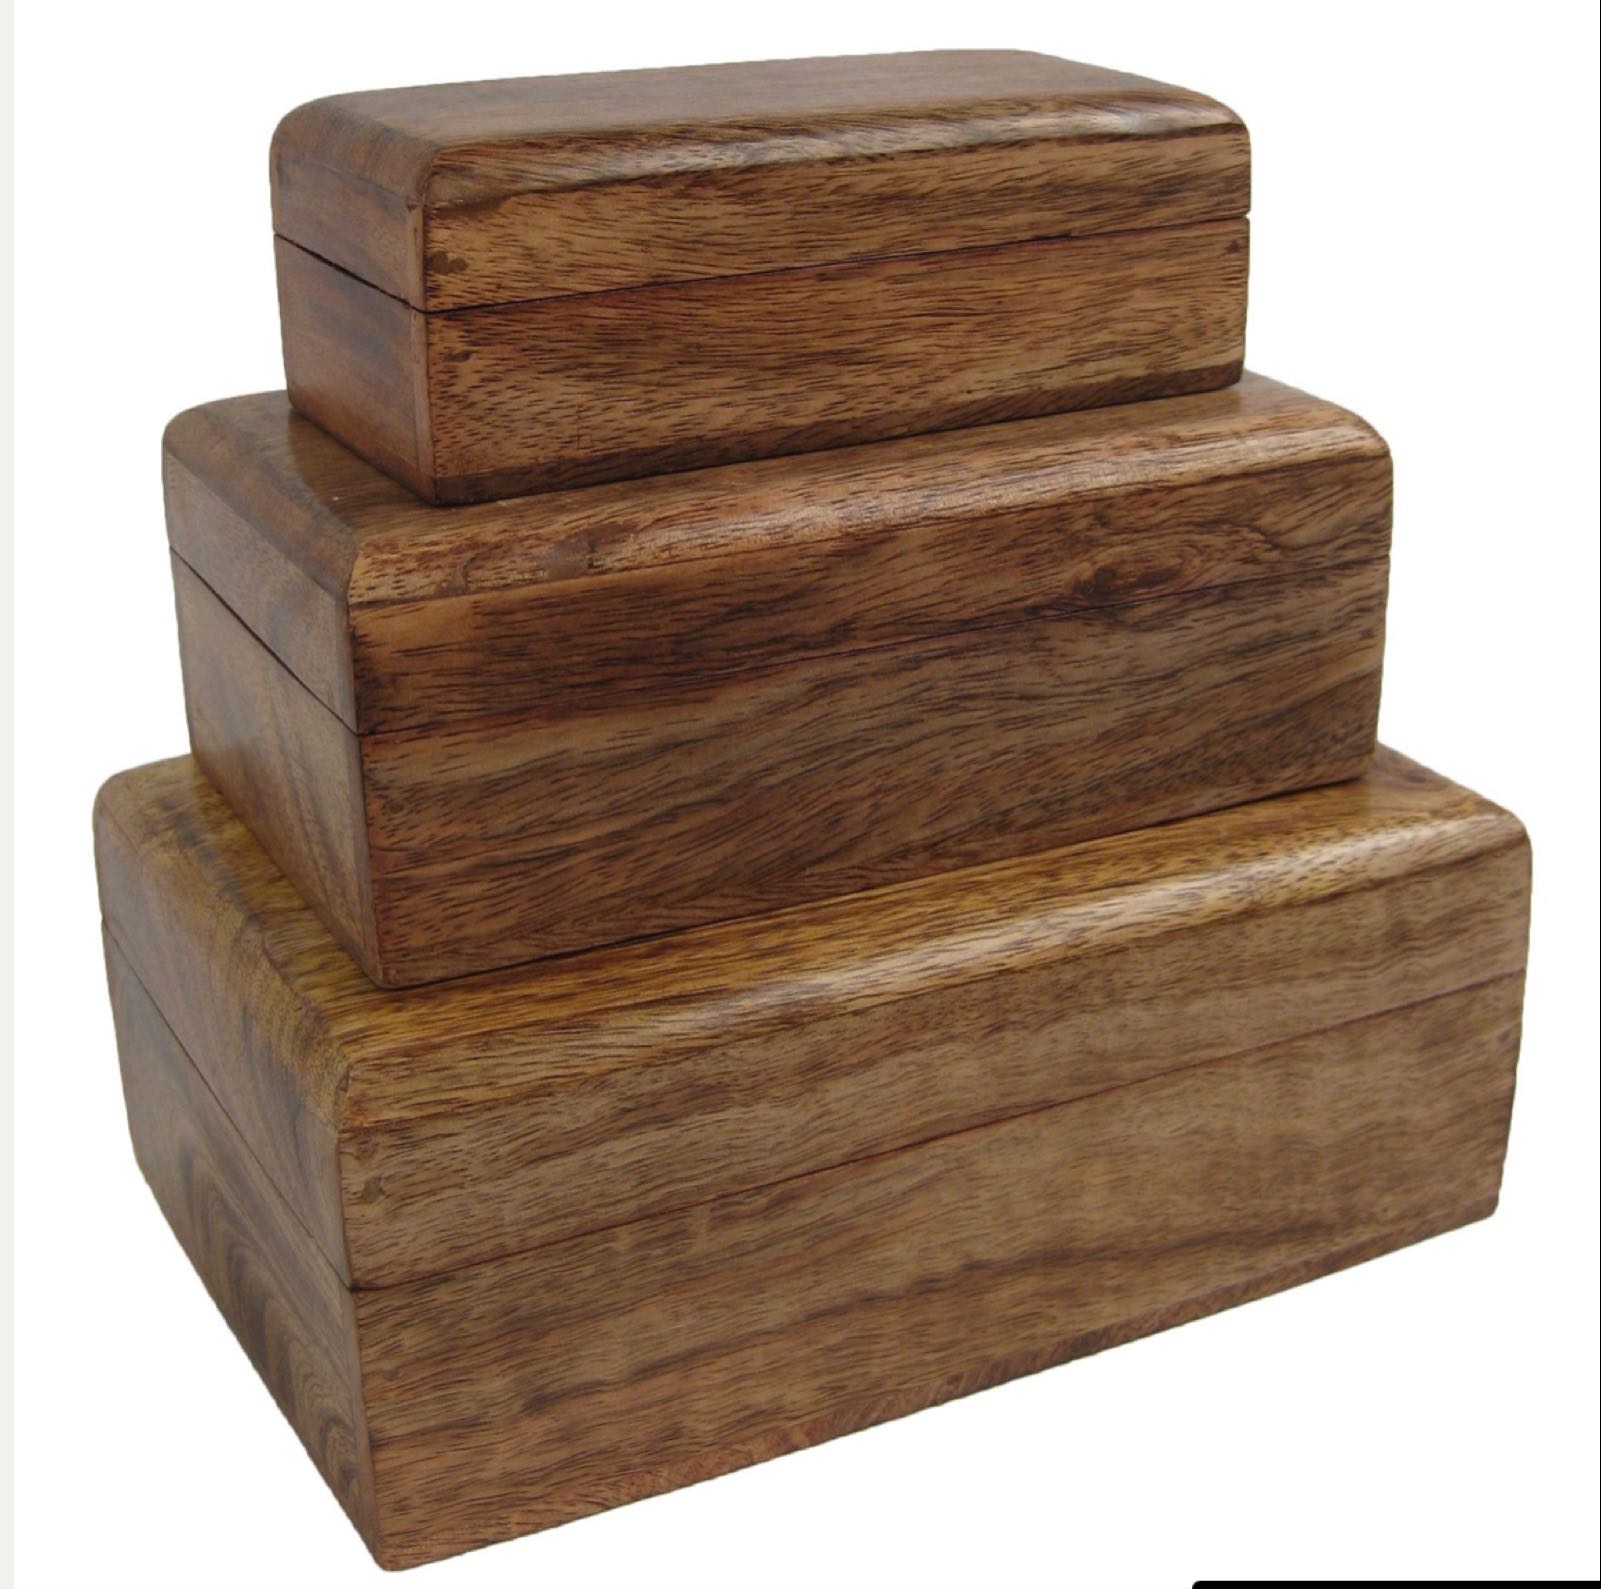 Oblong Plain Mango Boxes   (Can be engraved)